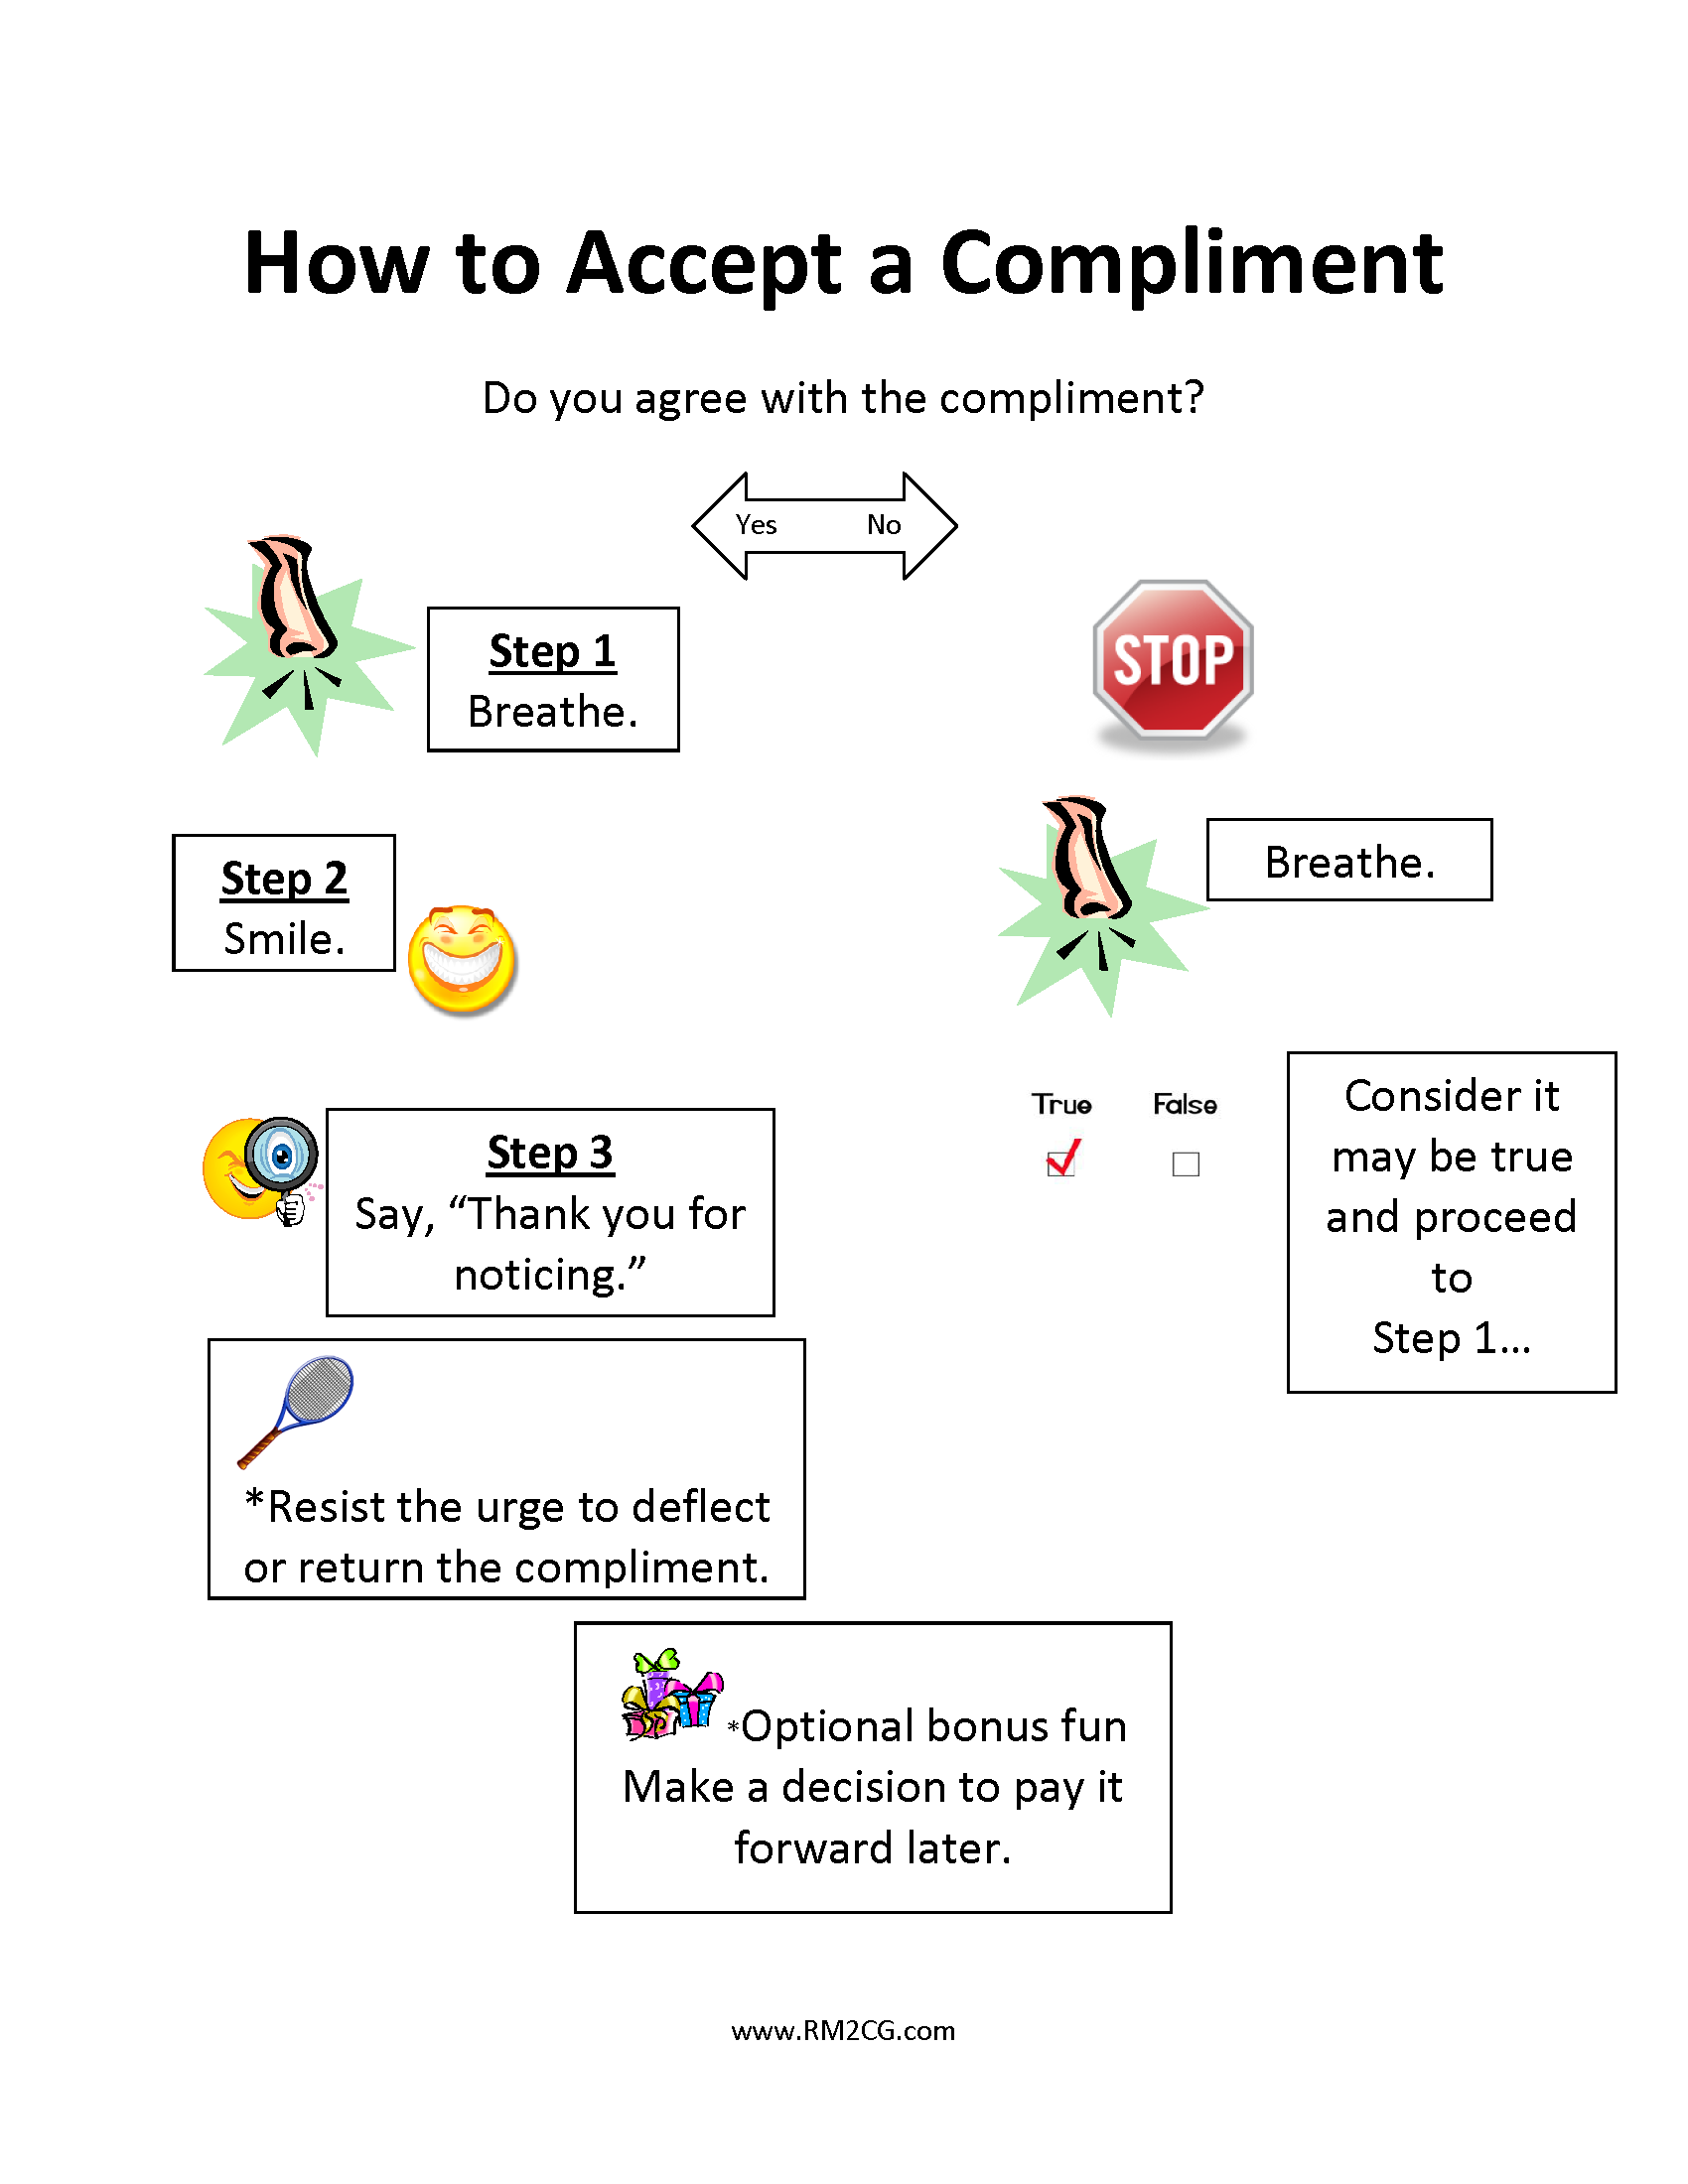 How to Accept a Compliment